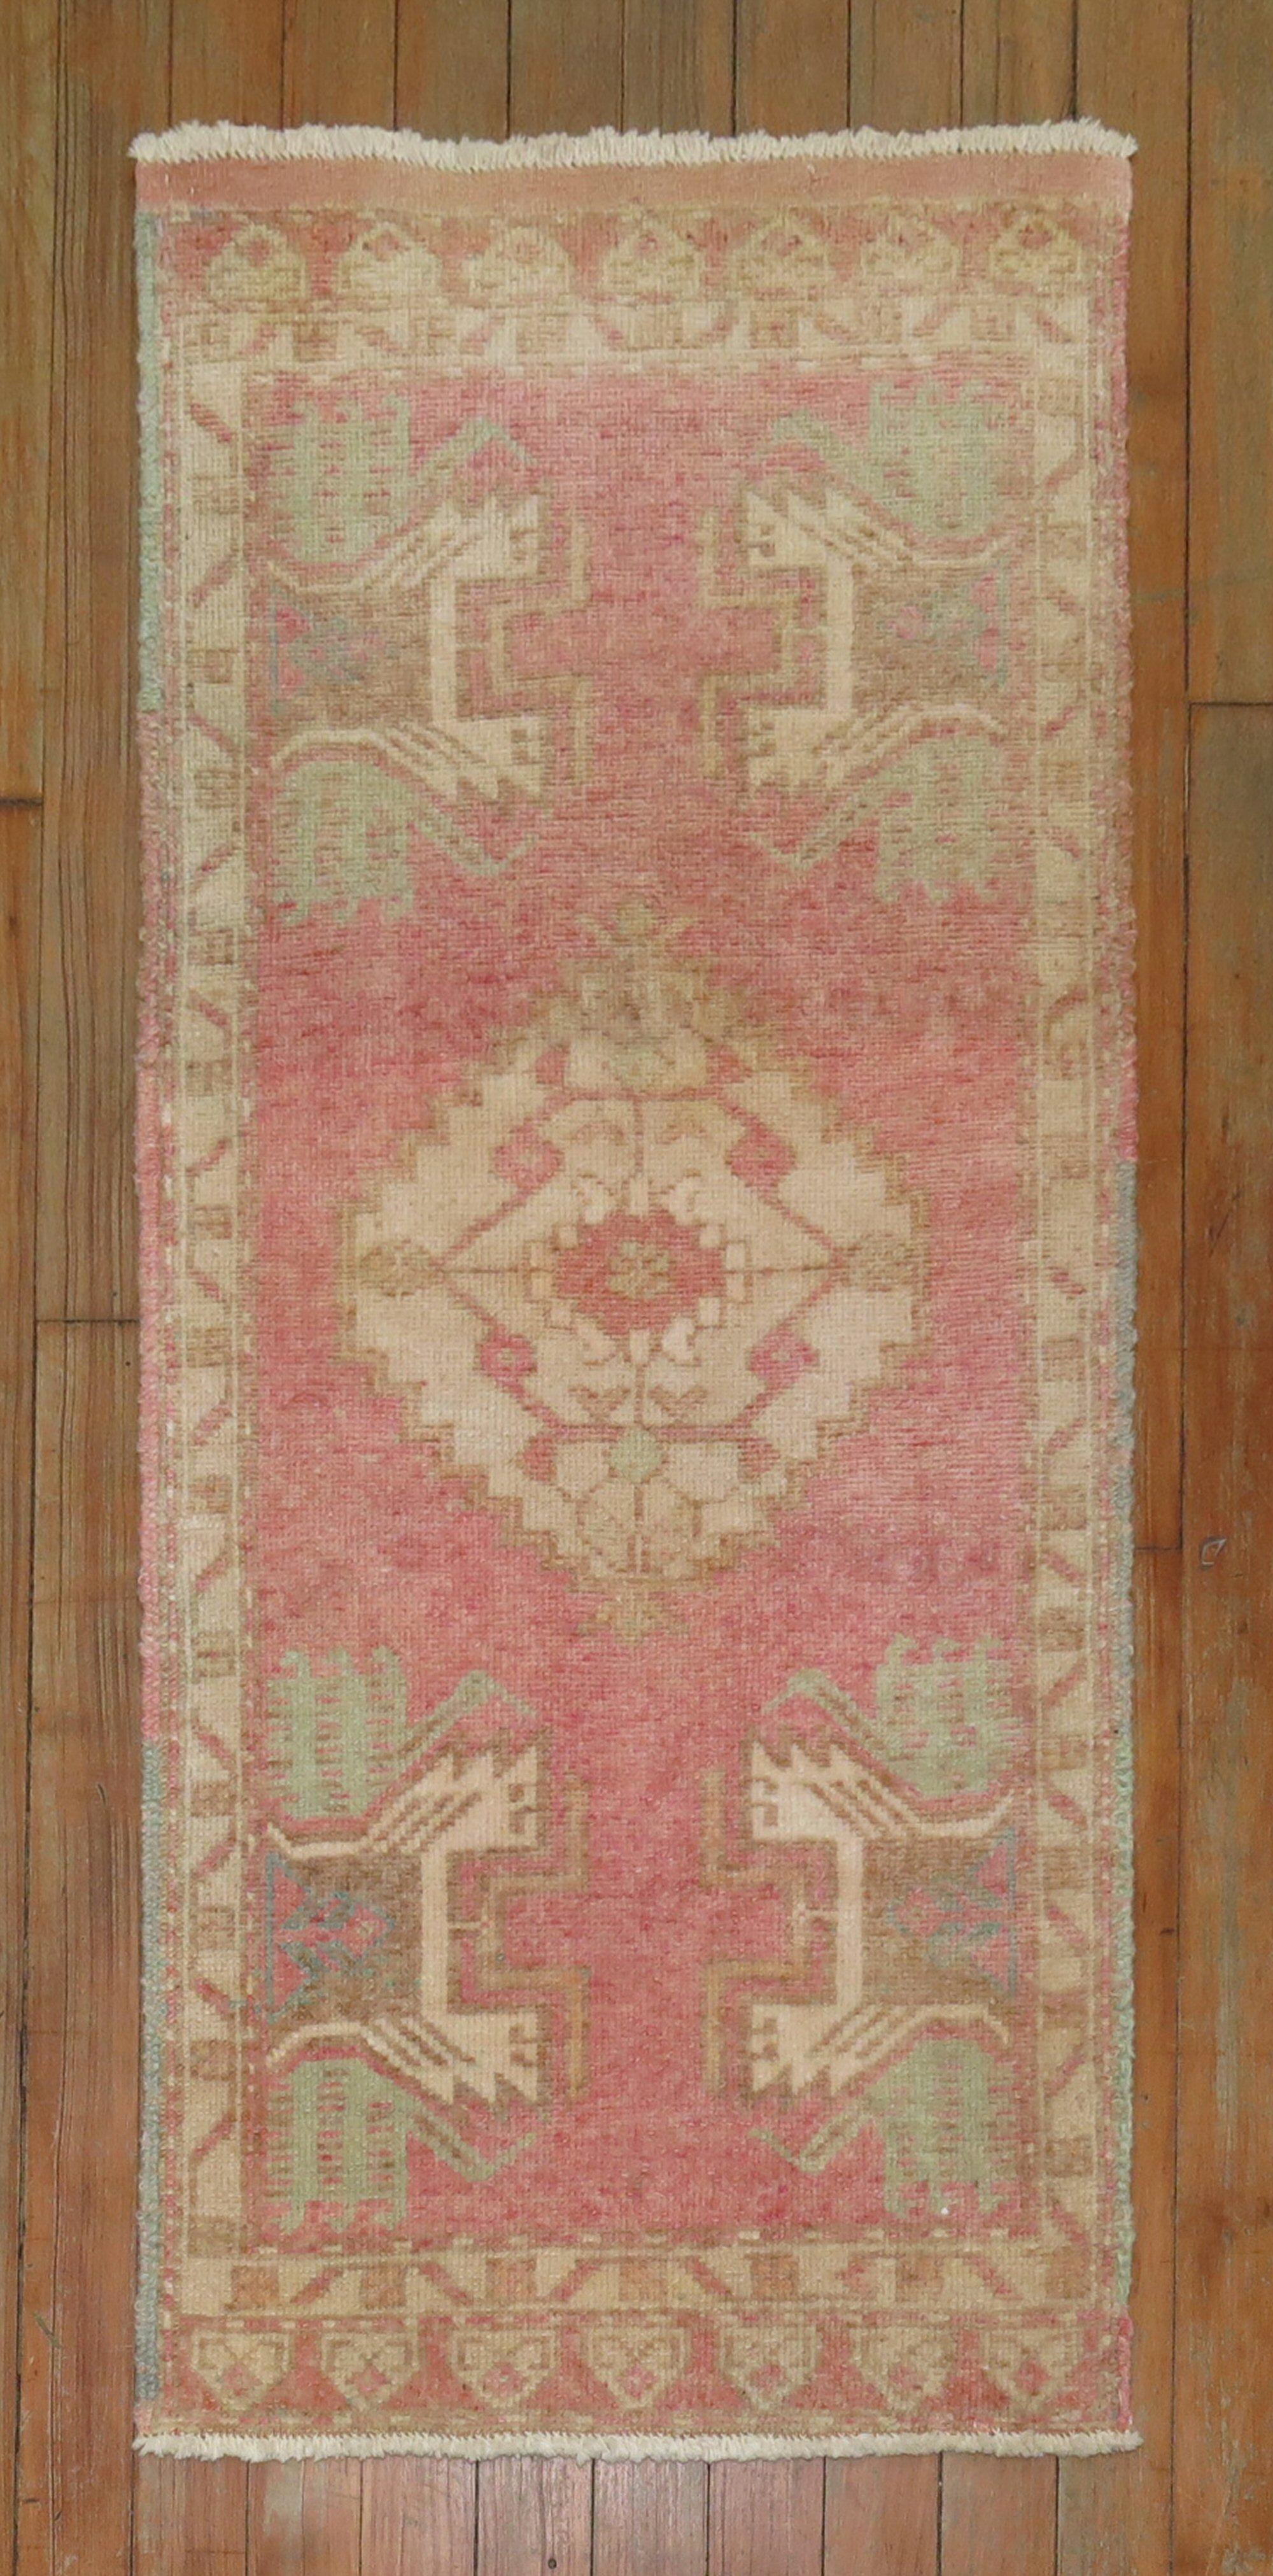 One of a kind vintage Turkish rug in a rare bubble gum pink color.

Measures: 1'8